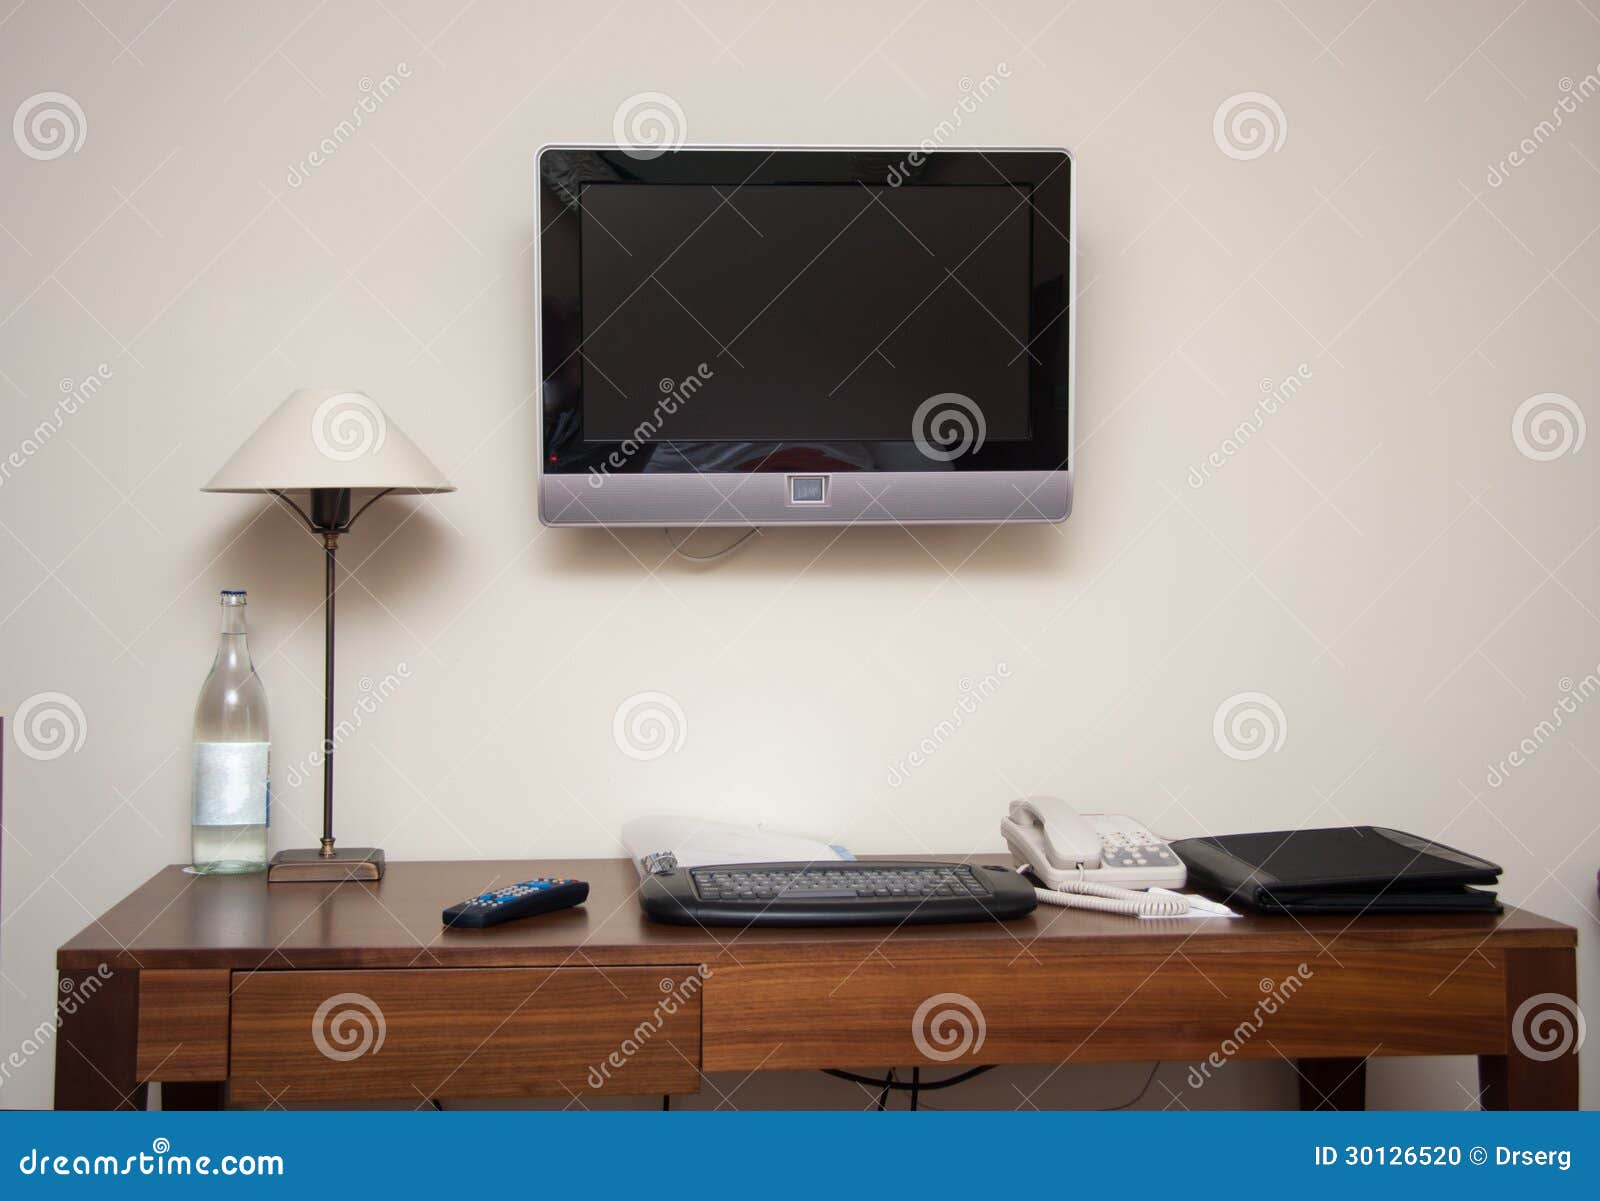 Lcd Tv Hotel Room Photos Free Royalty Free Stock Photos From Dreamstime